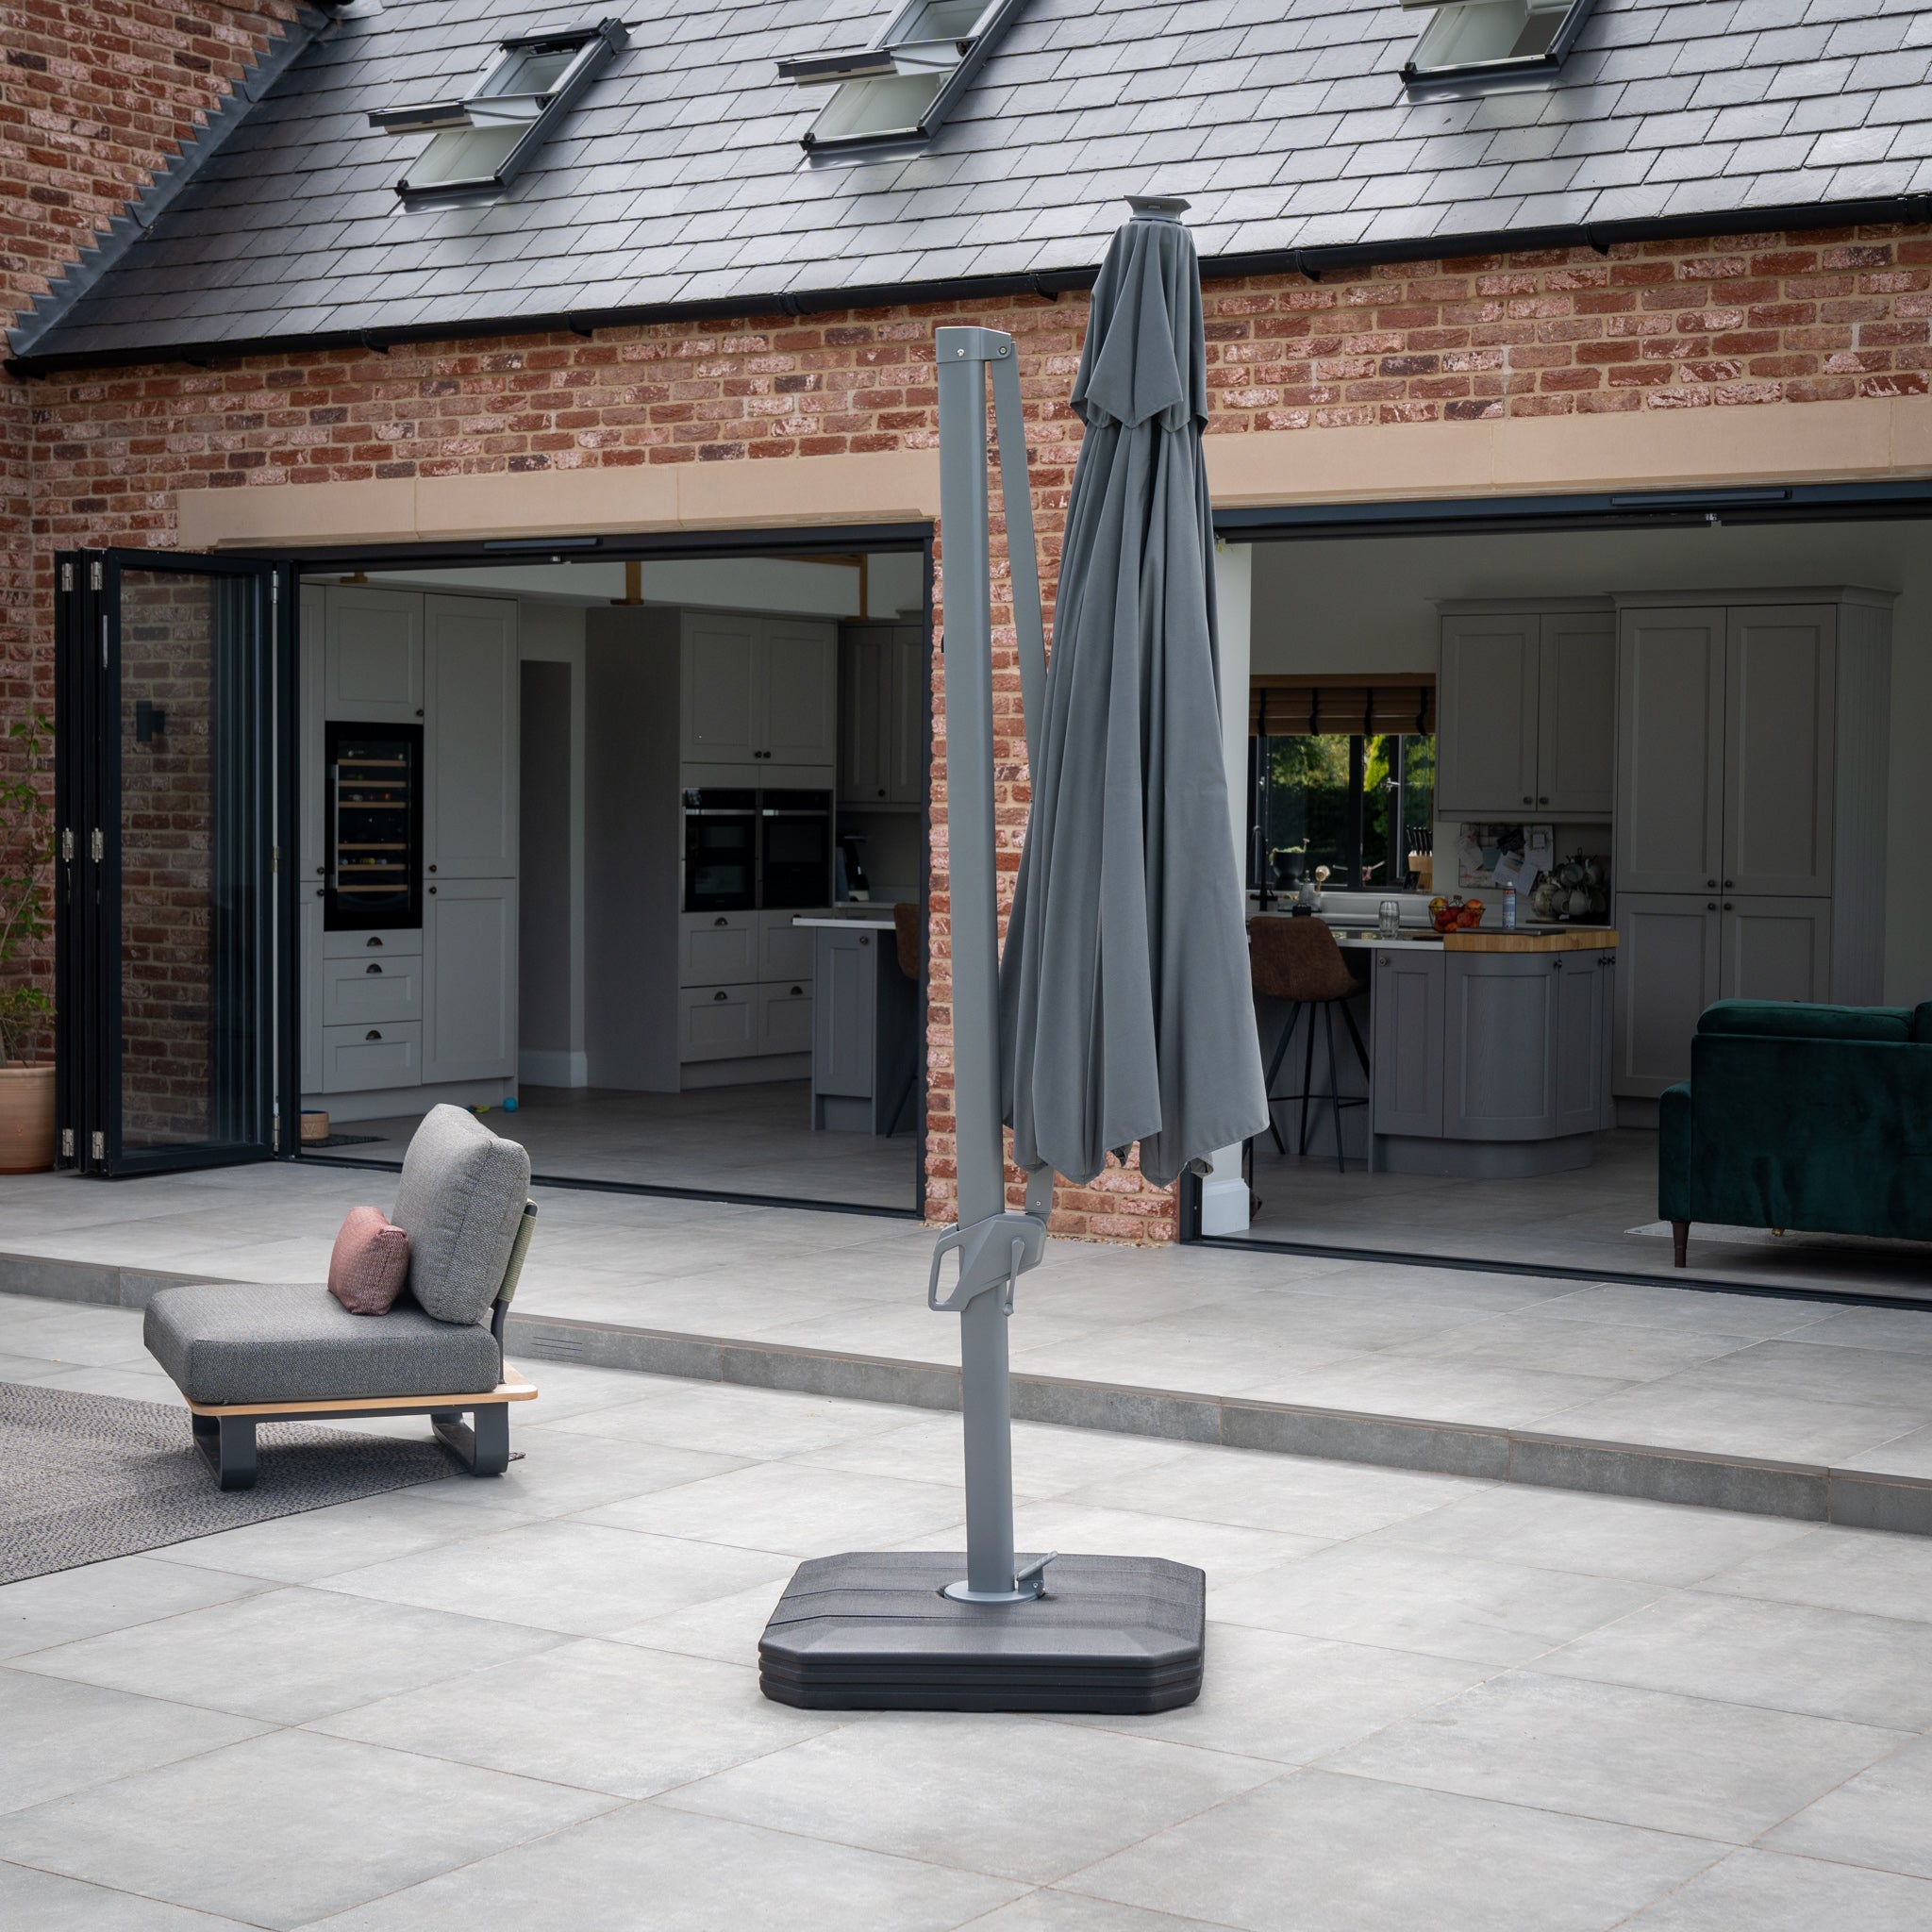 Ares 3.5m Round Cantilever Parasol with Solar powered LED Lights in Charcoal